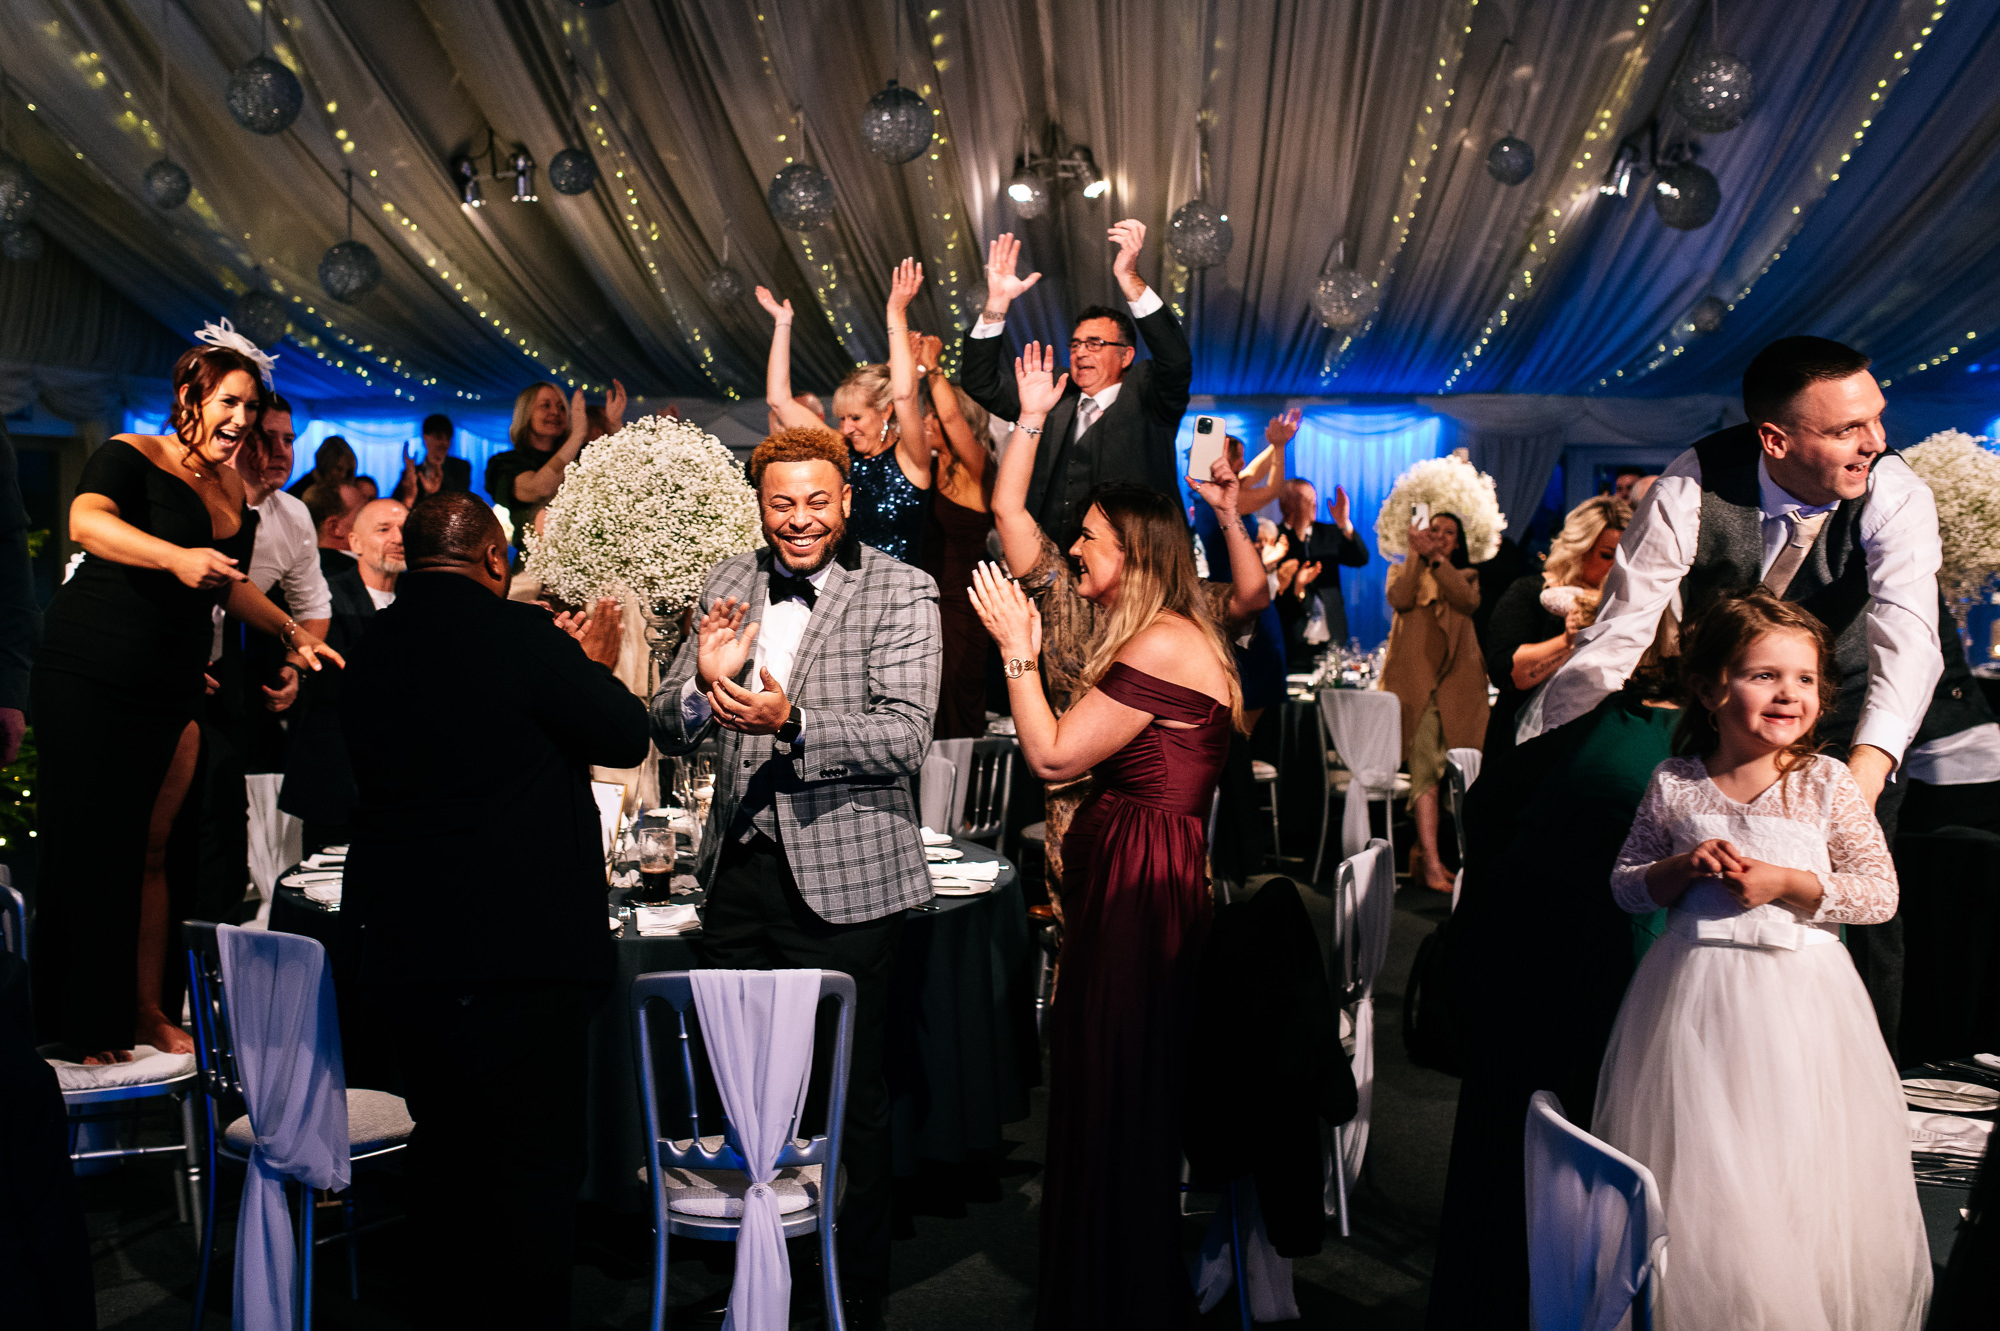 guests cheering as the couple enter their wedding breakfast